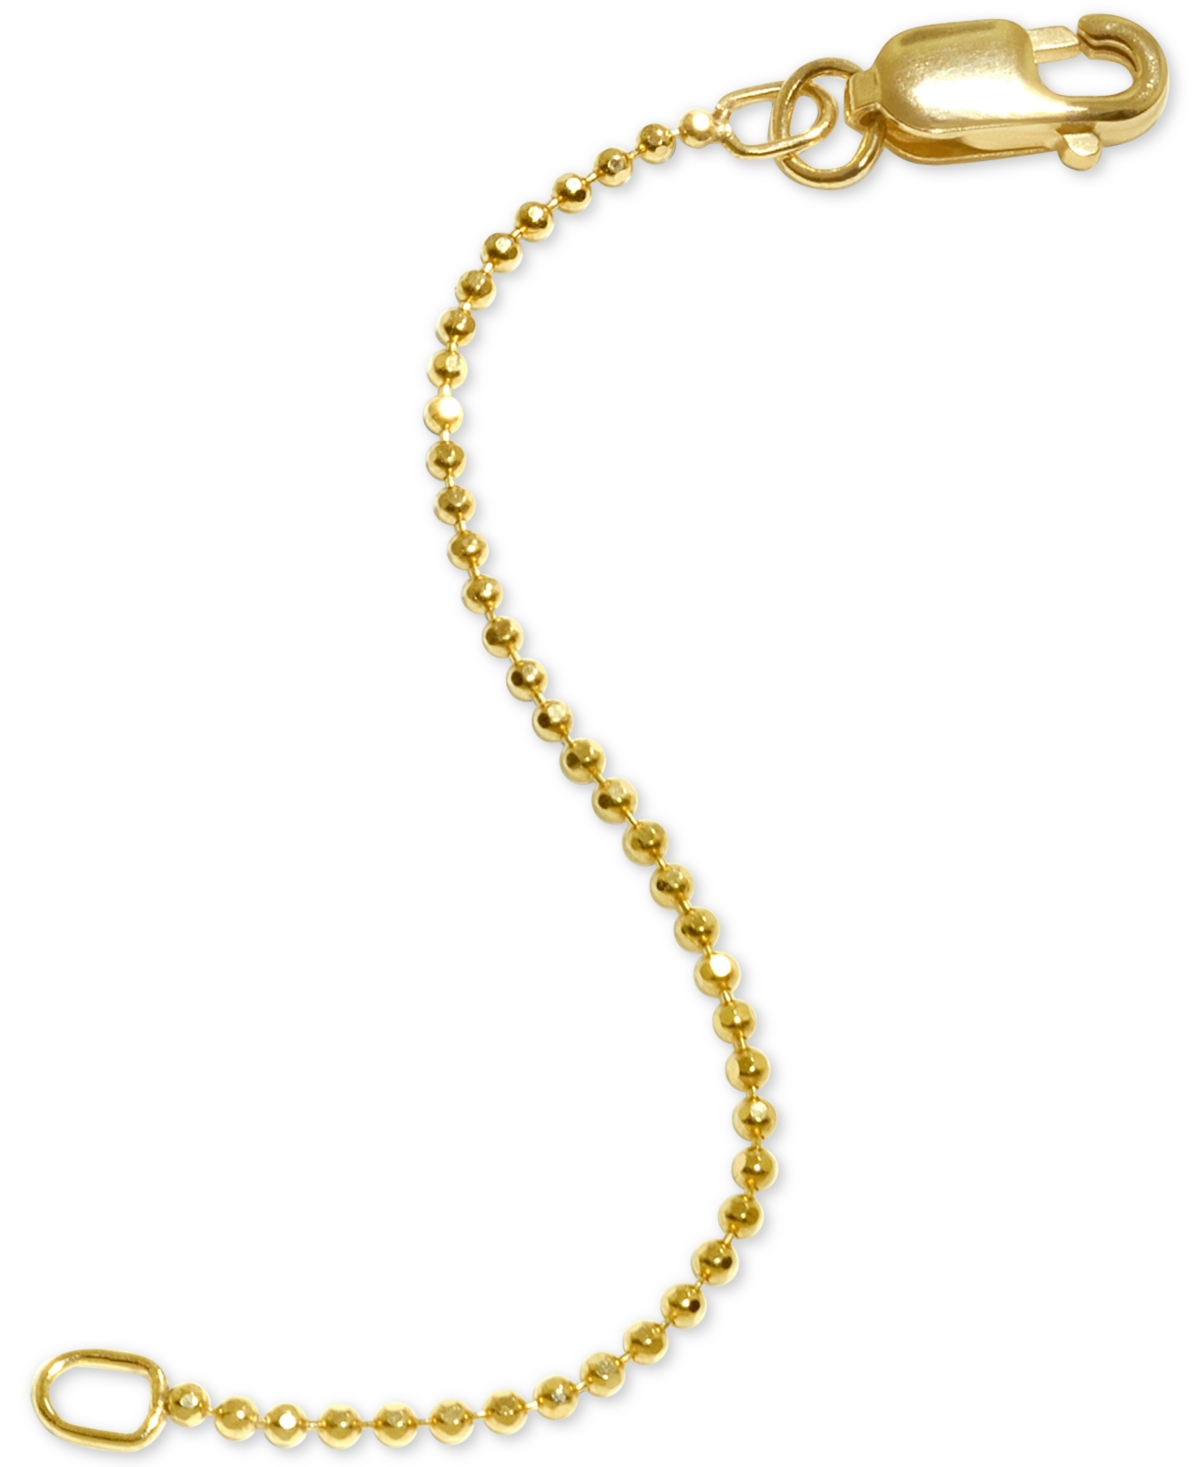 Alex Woo Beaded 2" Chain Extender in 14k Gold